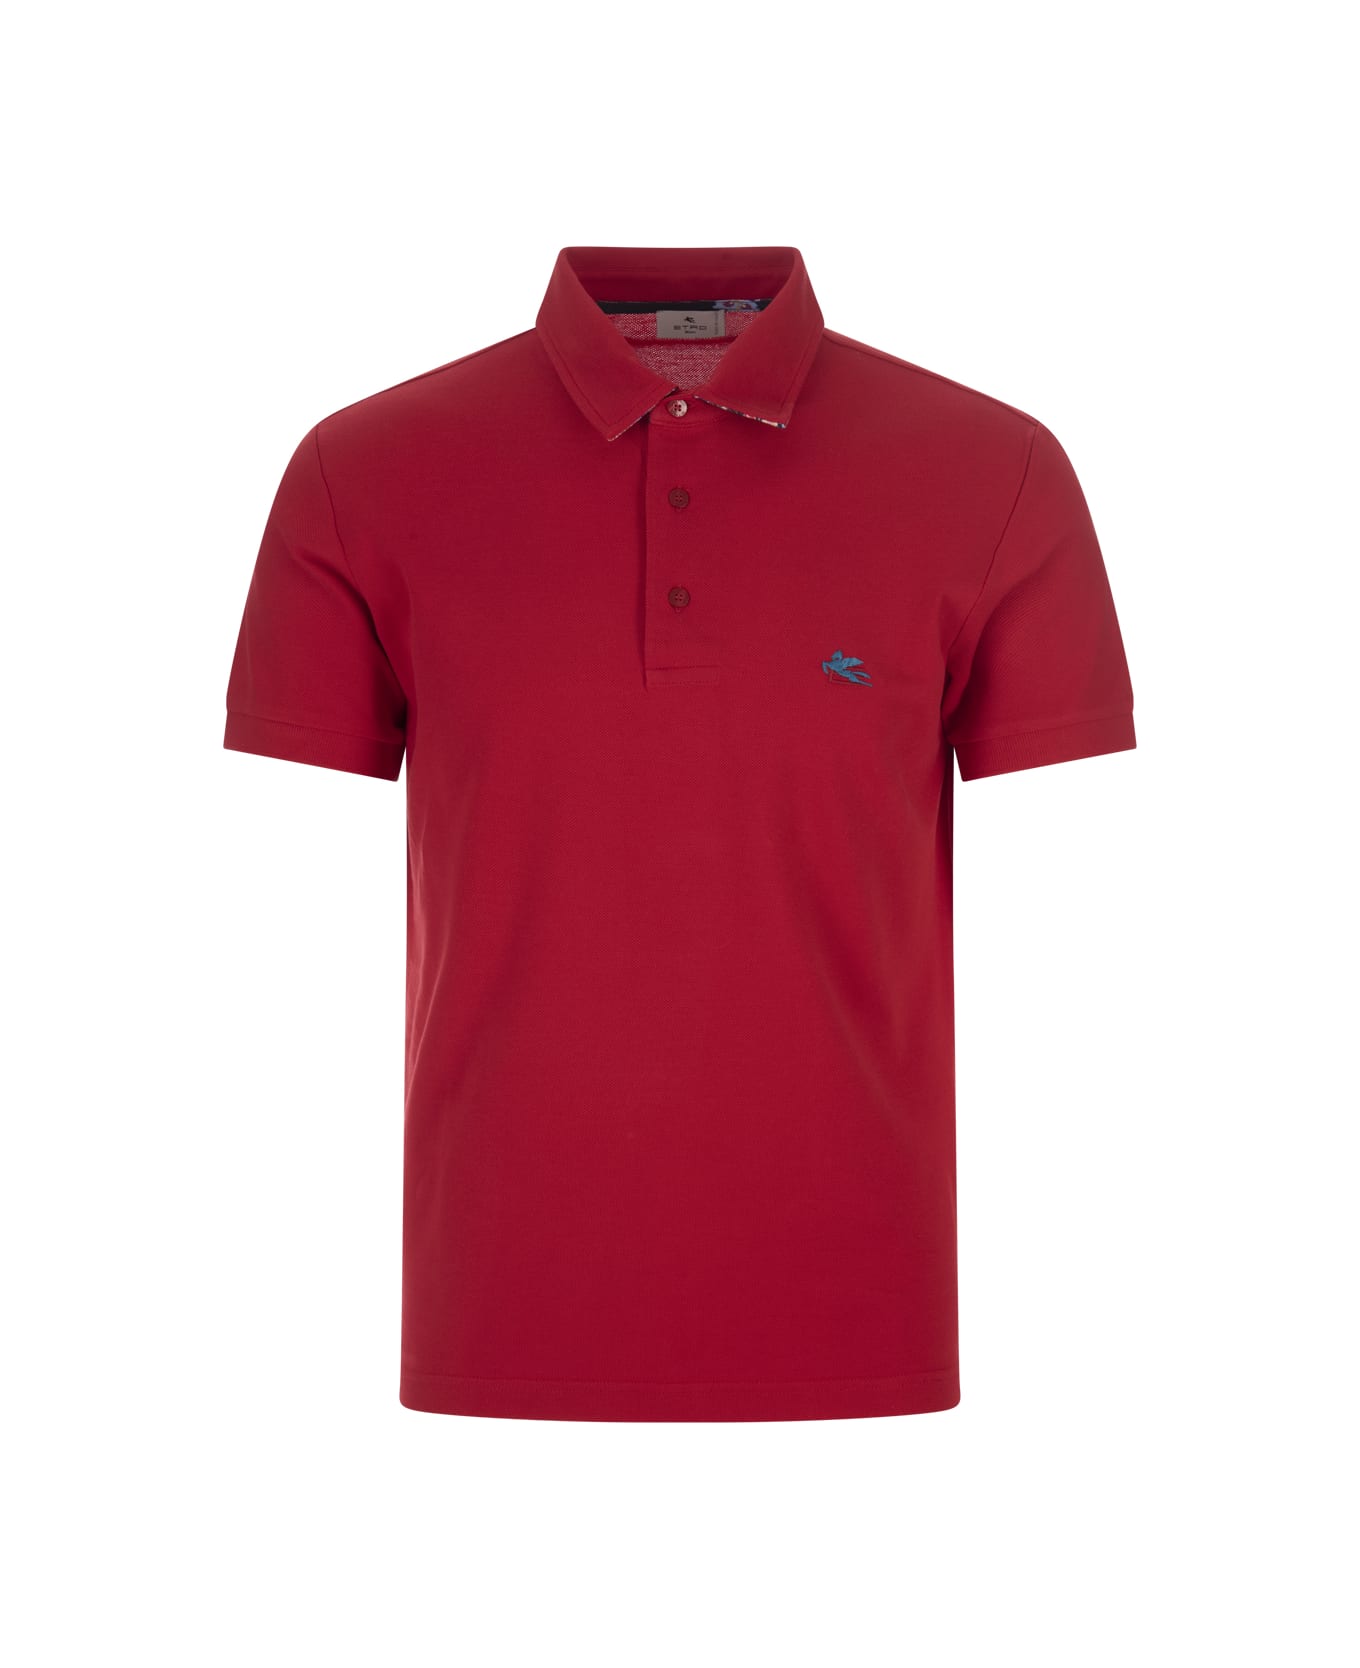 Etro Red Polo Shirt With Embroidered Pegasus - Red ポロシャツ